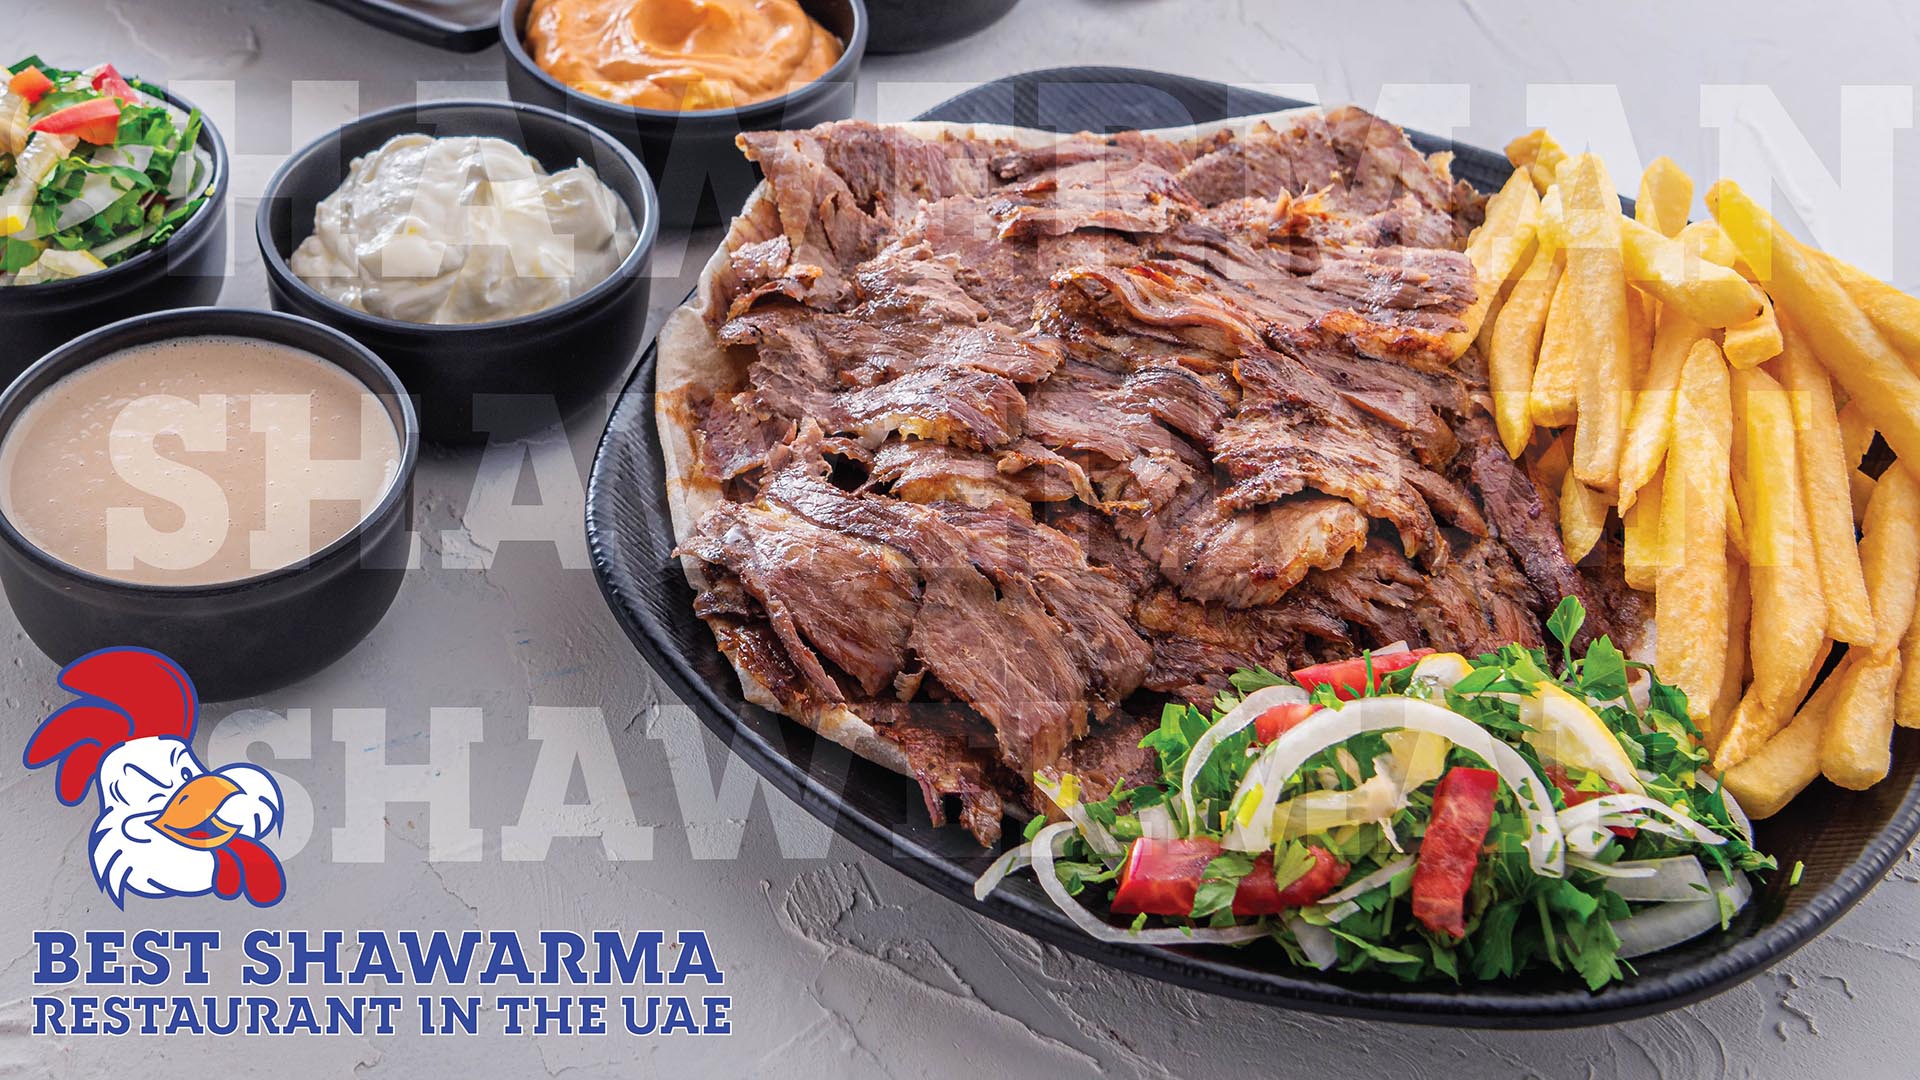 Savor Your Favorite Shawarma with Every Bite: Delight with Our Meat Shawarma